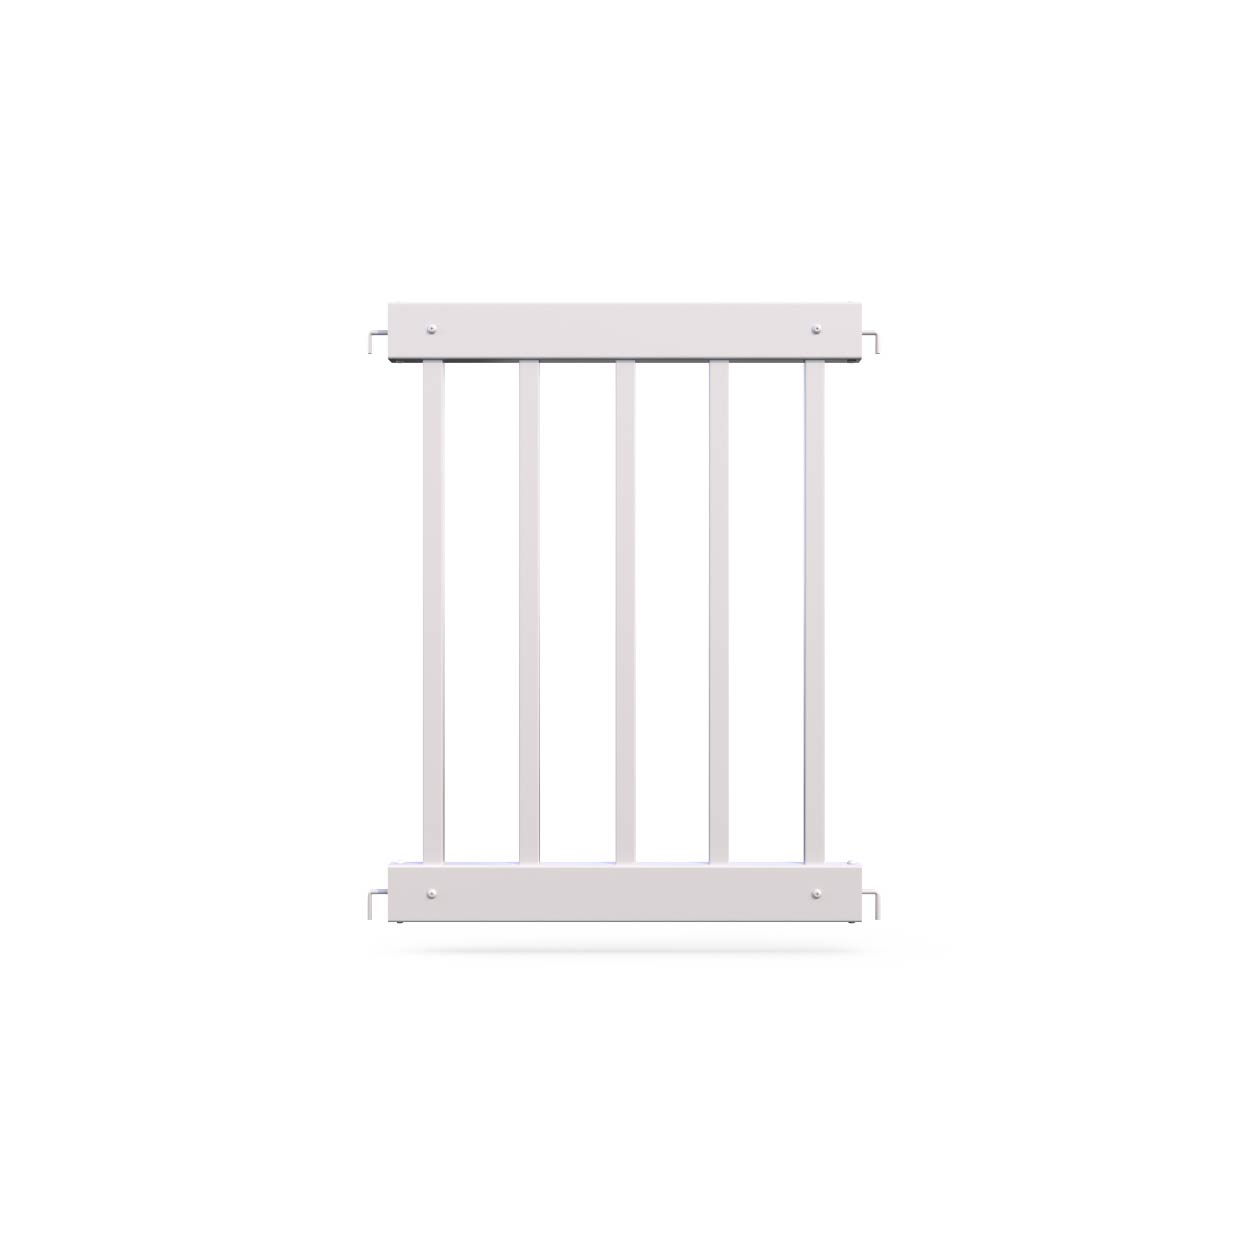 Mod-Fence 3ft Mod-Traditional Event Fence Panel